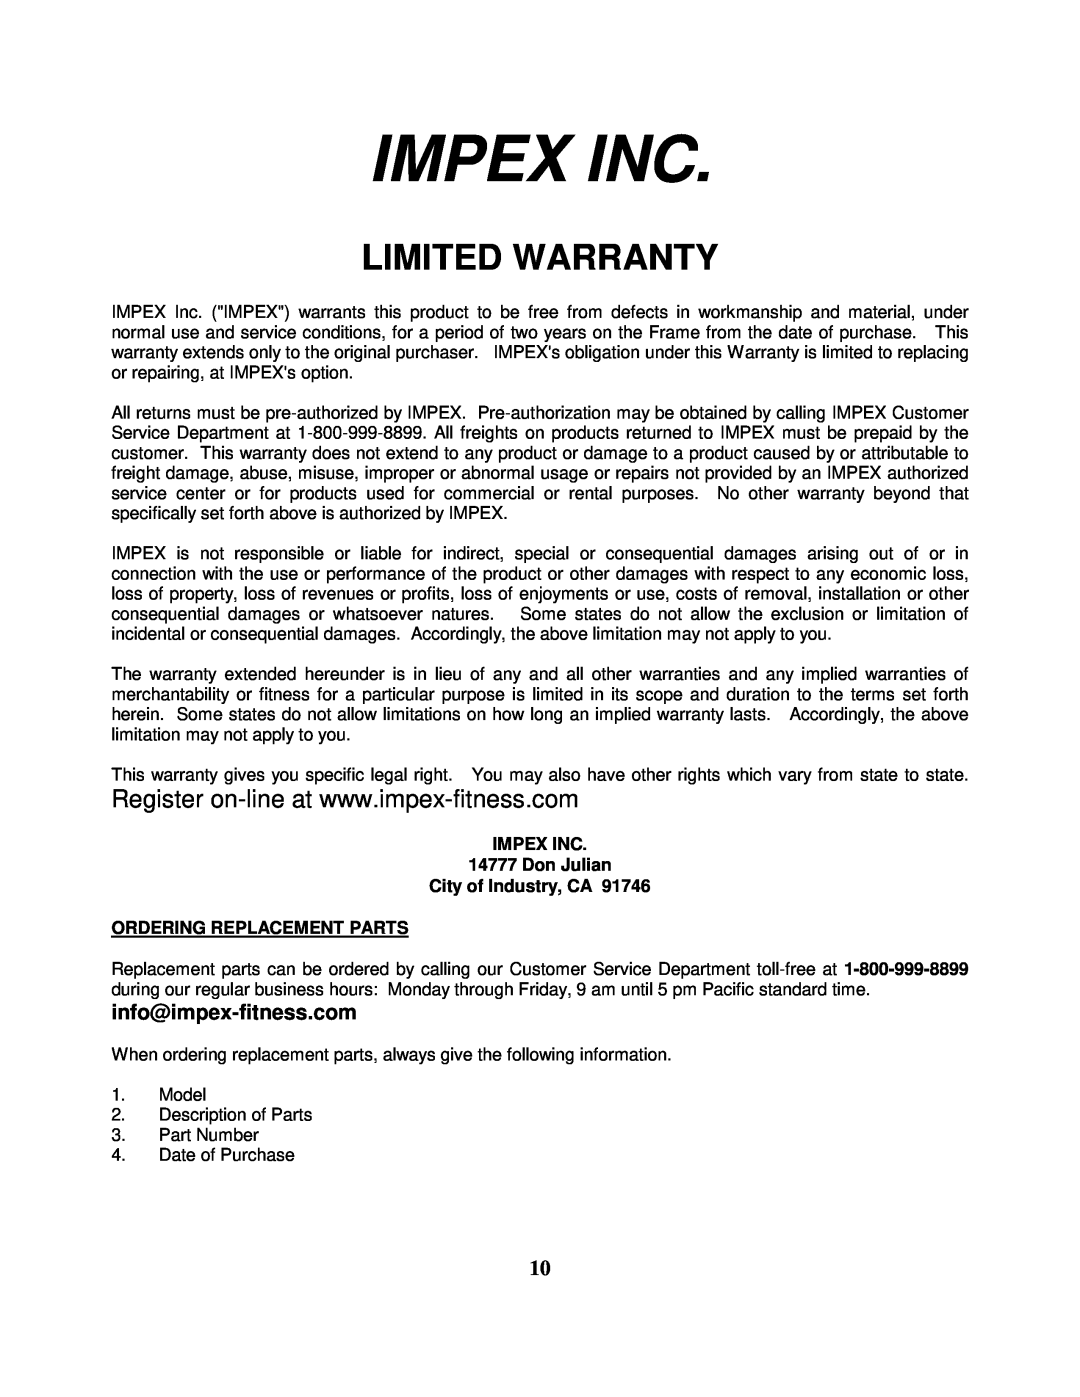 Impex CB-359 Impex Inc, Limited Warranty, IMPEX INC 14777 Don Julian City of Industry, CA, Ordering Replacement Parts 